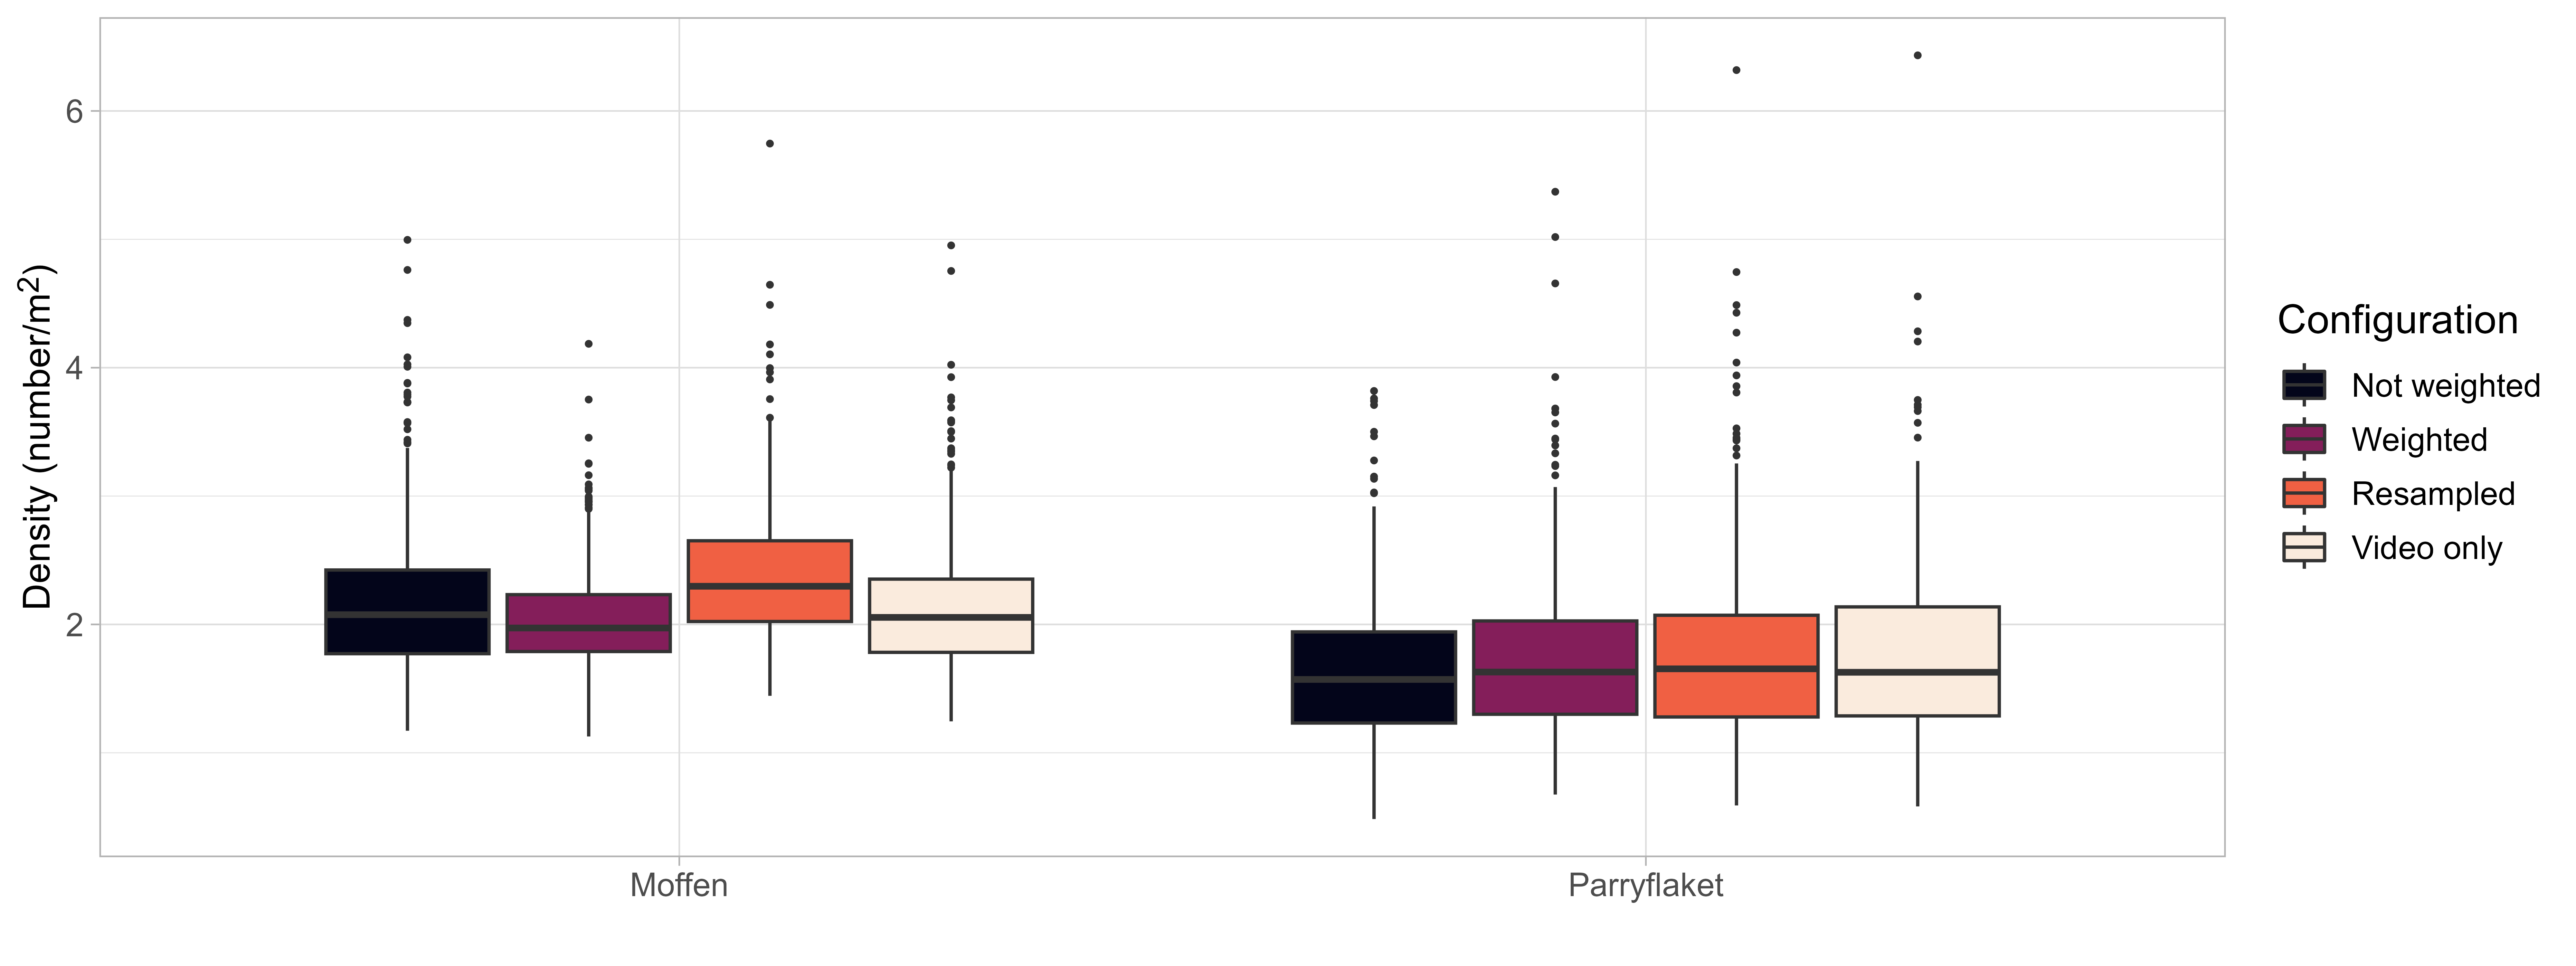 Estimated scallop density on Moffen and Parryflaket beds outside of protected areas. Shown are boxplots of estimated mean density based on 1000 iterations of four different GAMM configurations: 1) using video and dredge data combined (unweighted), 2) video and dredge data weighted with the number of images per station (dredge fixed to 0.5), 3) video and dredge data weighted, with video counts resampled from the estimated count distributions, and 4) video data only as the baseline used in Stokkeland (2023). Each iteration represents a simulated density across the integration grid based on means and standard errors estimated with the spatial GAMM. For resampled abundance estimated, the spatial GAMM was re-fitted in each iteration to the resampled count data. Boxplots show median (solid lines), 25% and 75% percentiles (boxes), 1.5 interquartile range (whiskers), and outliers (dots).